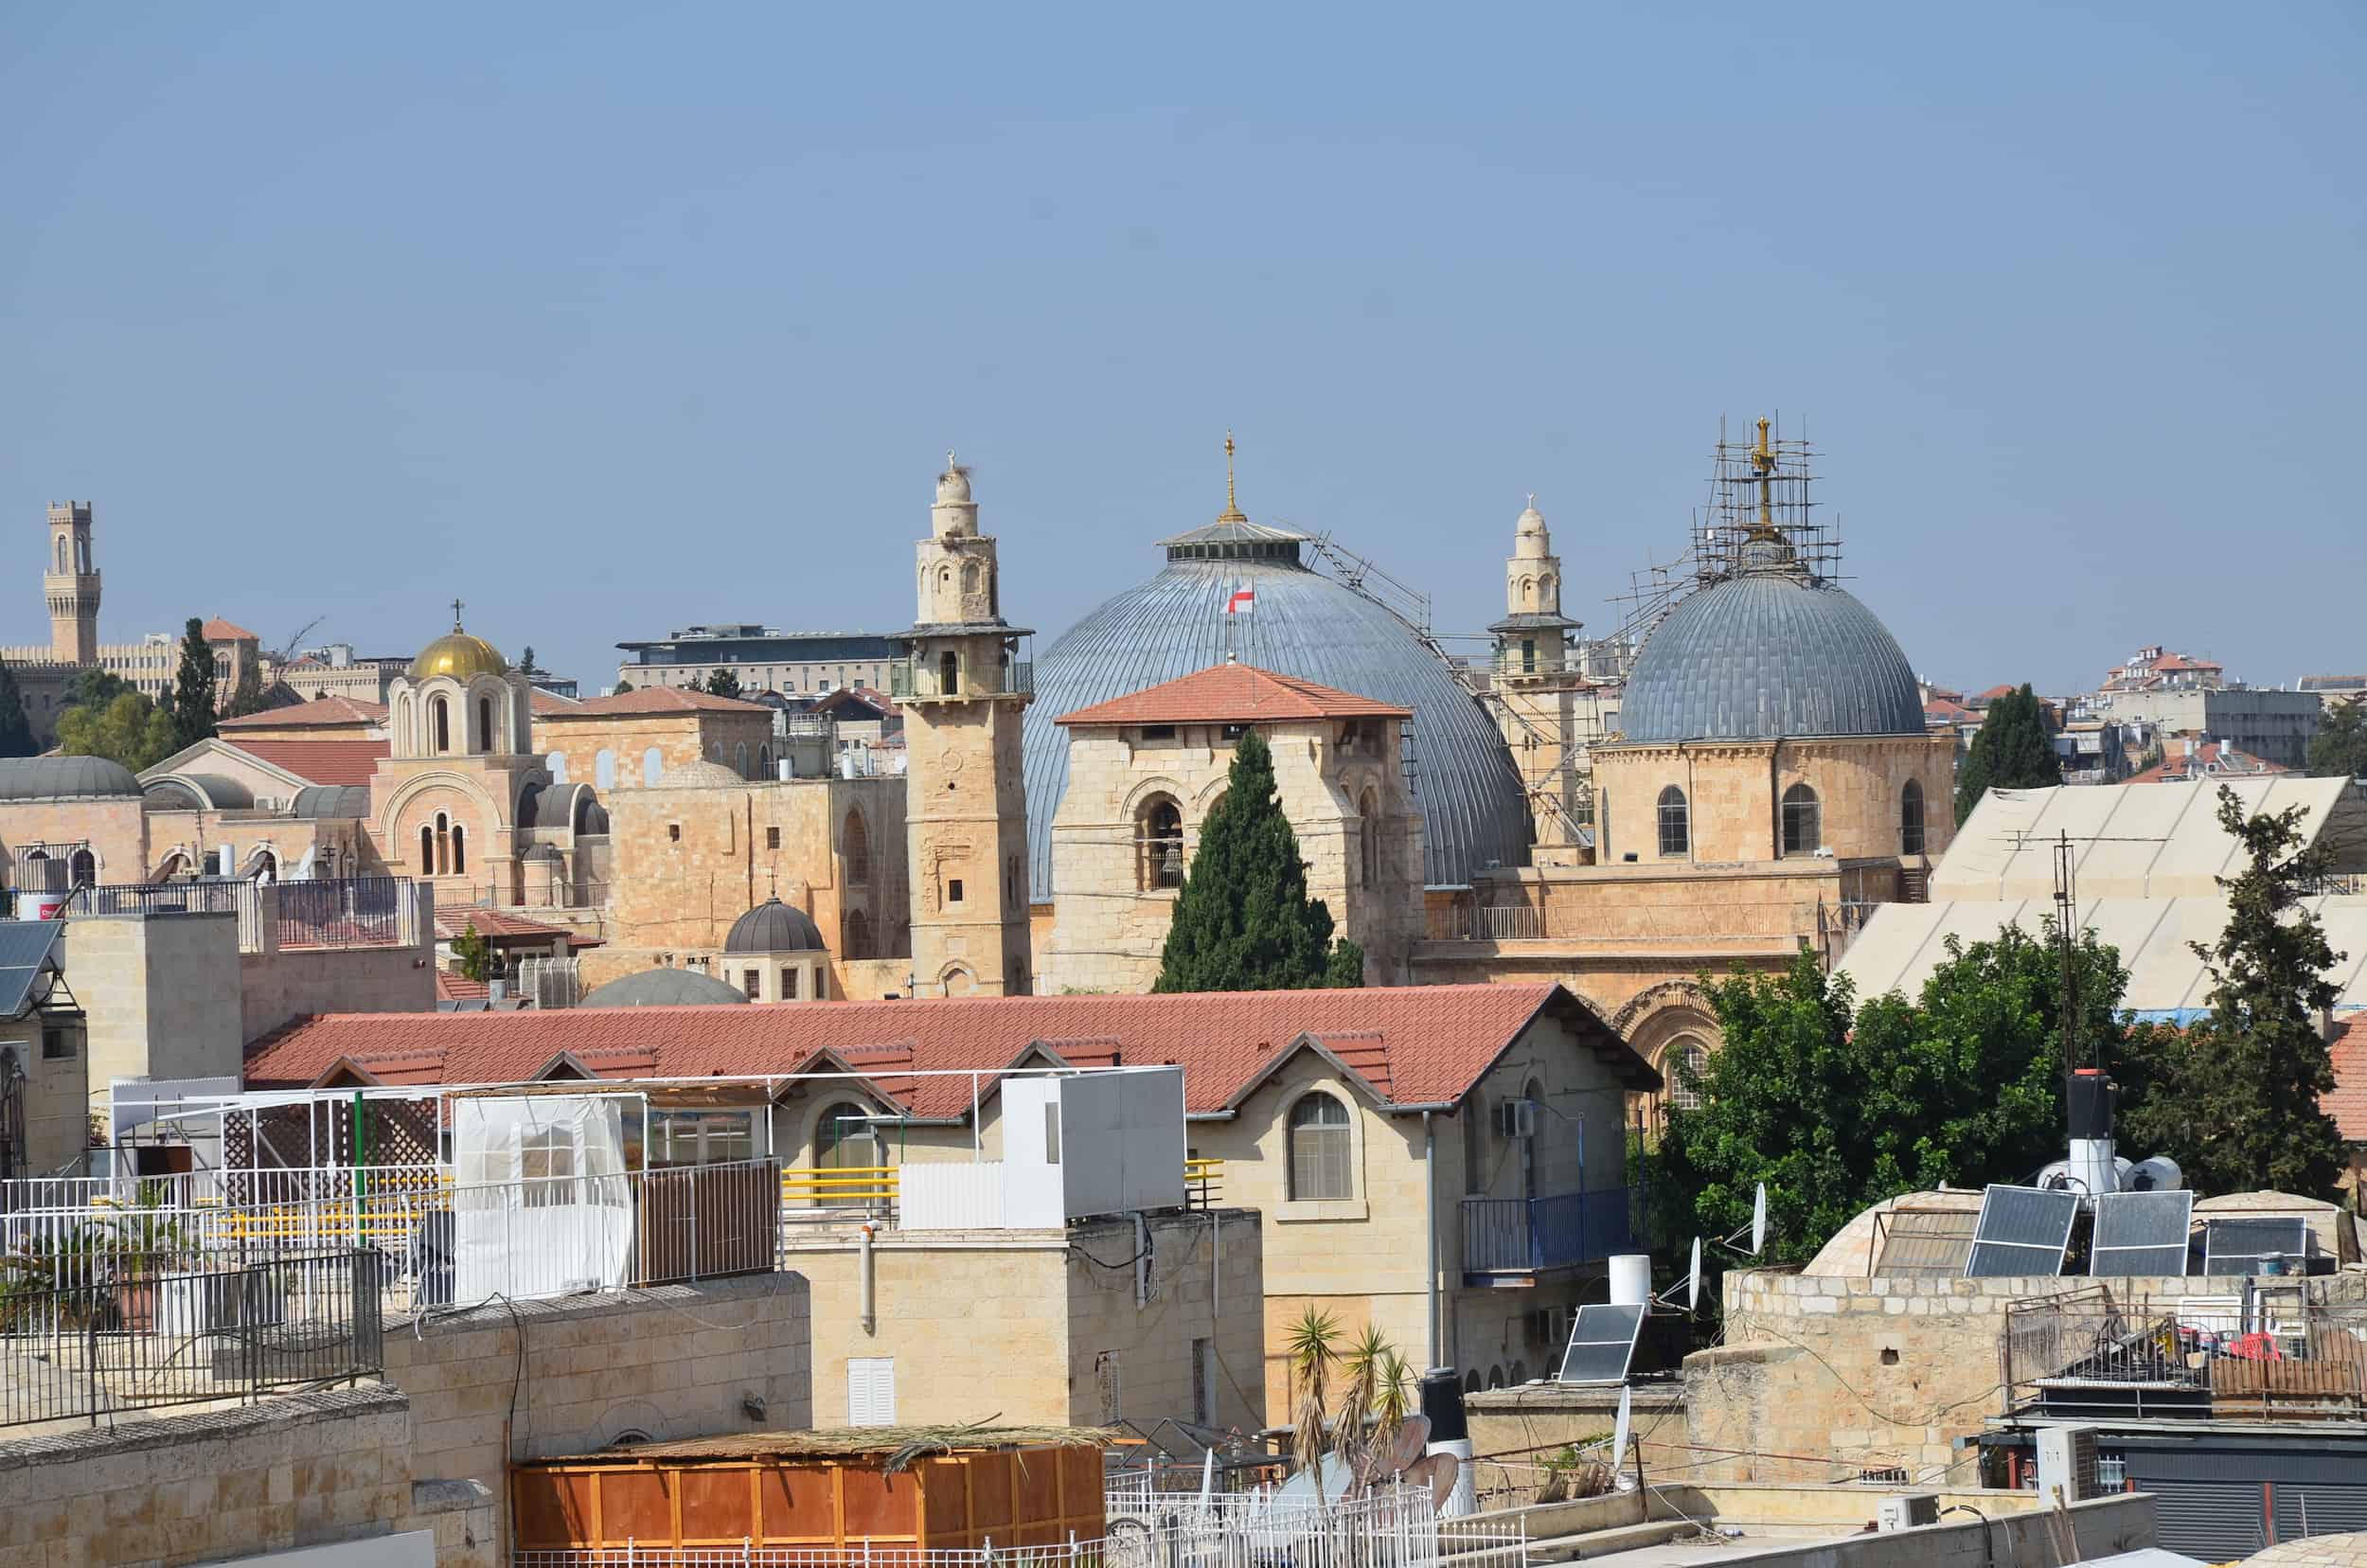 Domes of the Church of the Holy Sepulchre from the Hurva Synagogue in Jerusalem